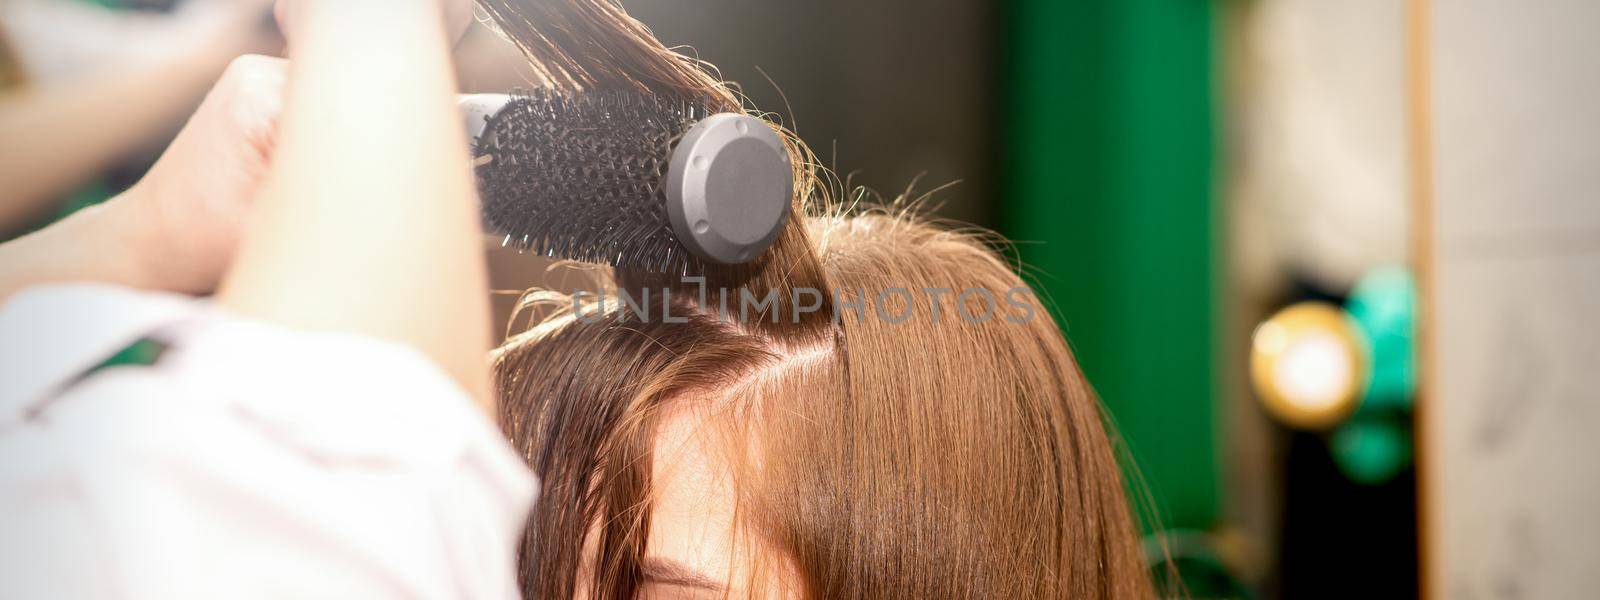 A hairdresser is drying long brown hair with a hairdryer and round brush in a beauty salon. by okskukuruza